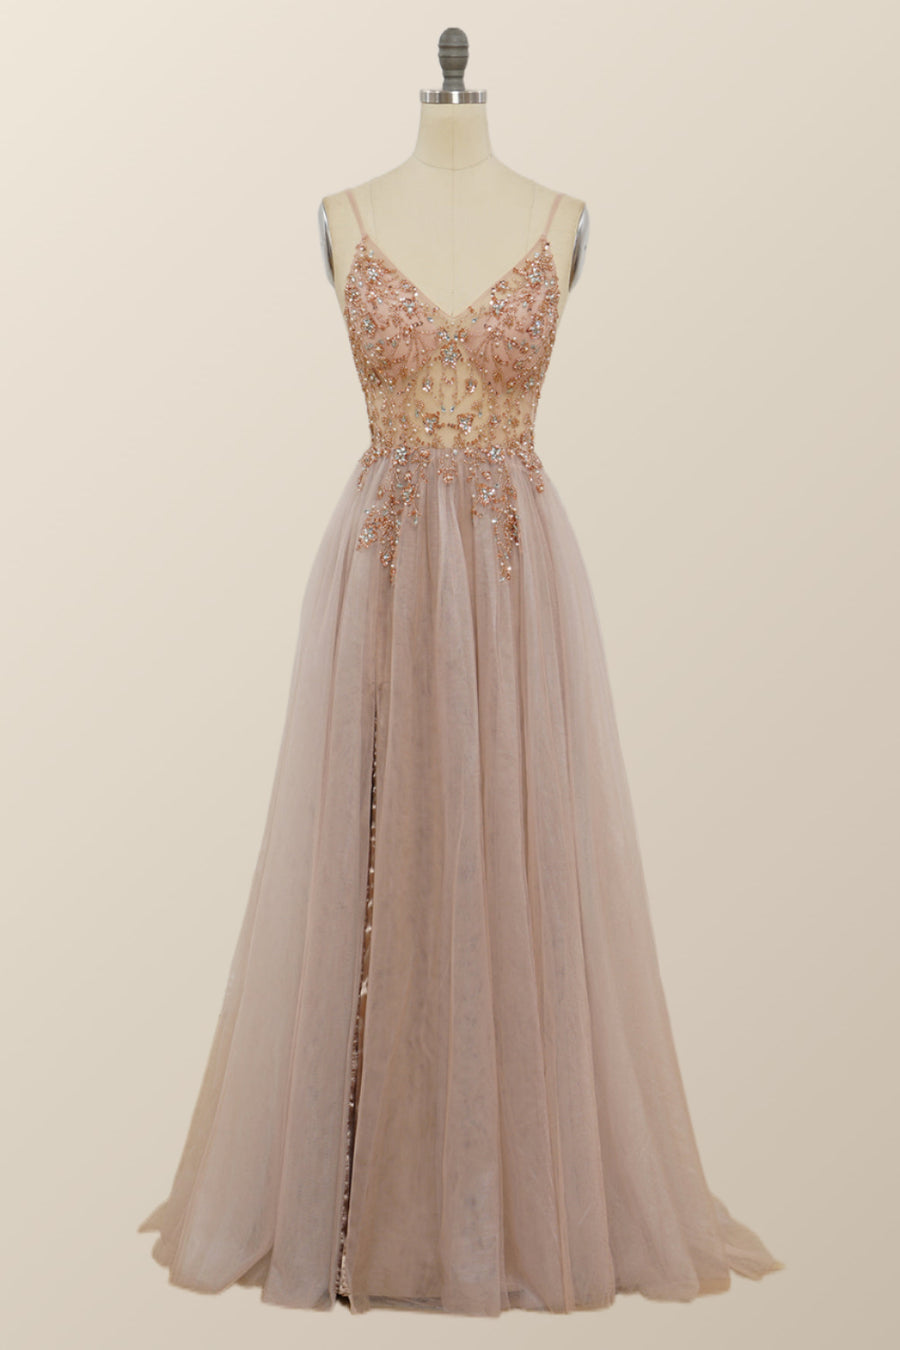 Rhinestones See Through Champagne Long Party Dress